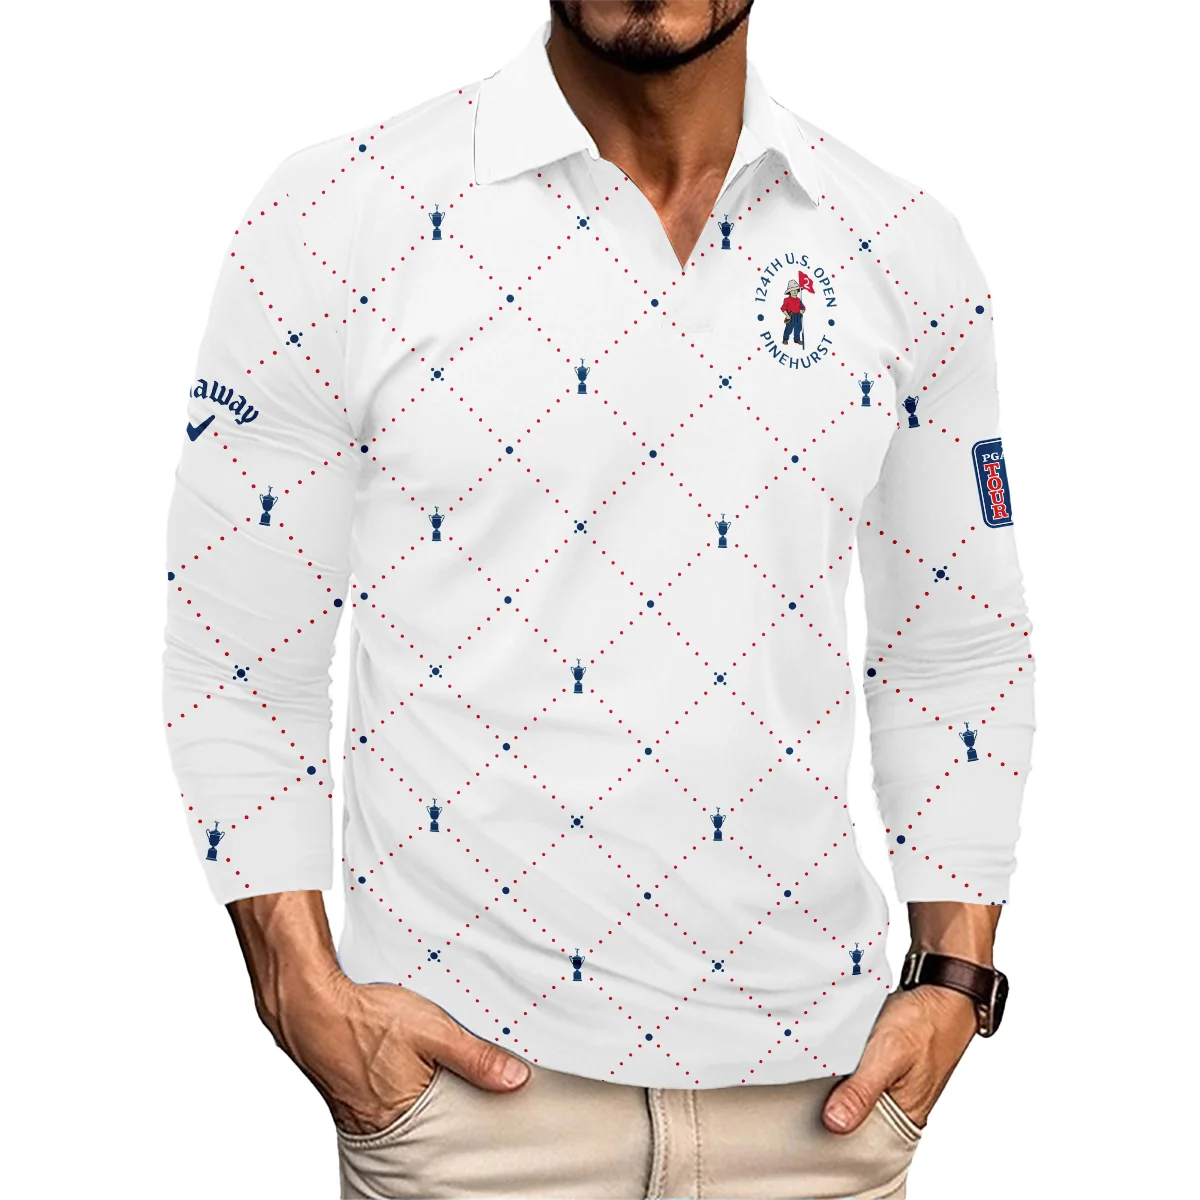 Argyle Pattern With Cup 124th U.S. Open Pinehurst Callaway Hoodie Shirt Style Classic Hoodie Shirt